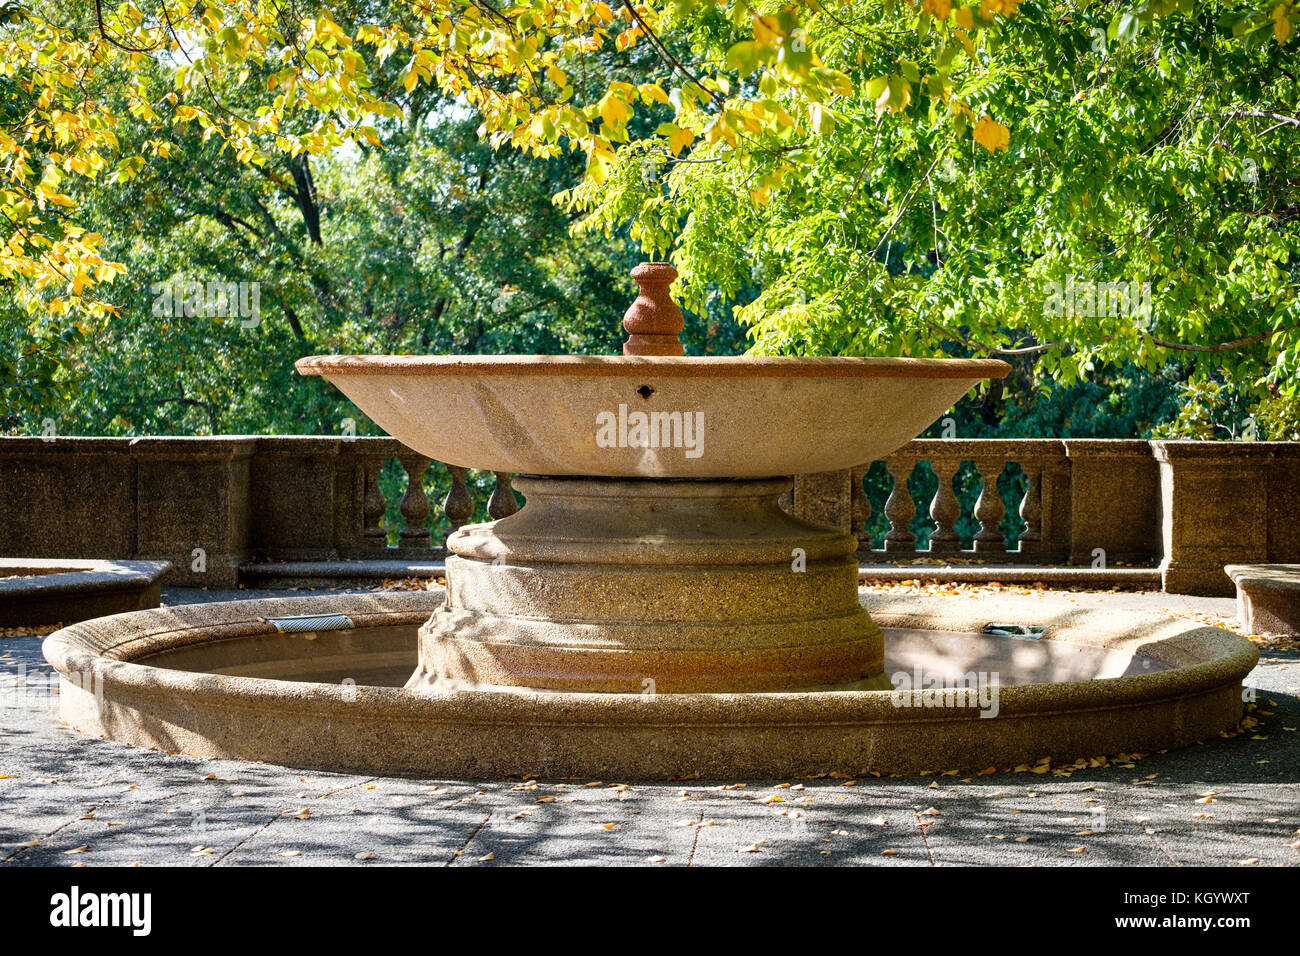 Columbia Heights neighbourhood city park, Meridian Hill Park/Malcolm X Park fountain in Washington, D.C., United States of America, USA. Stock Photo